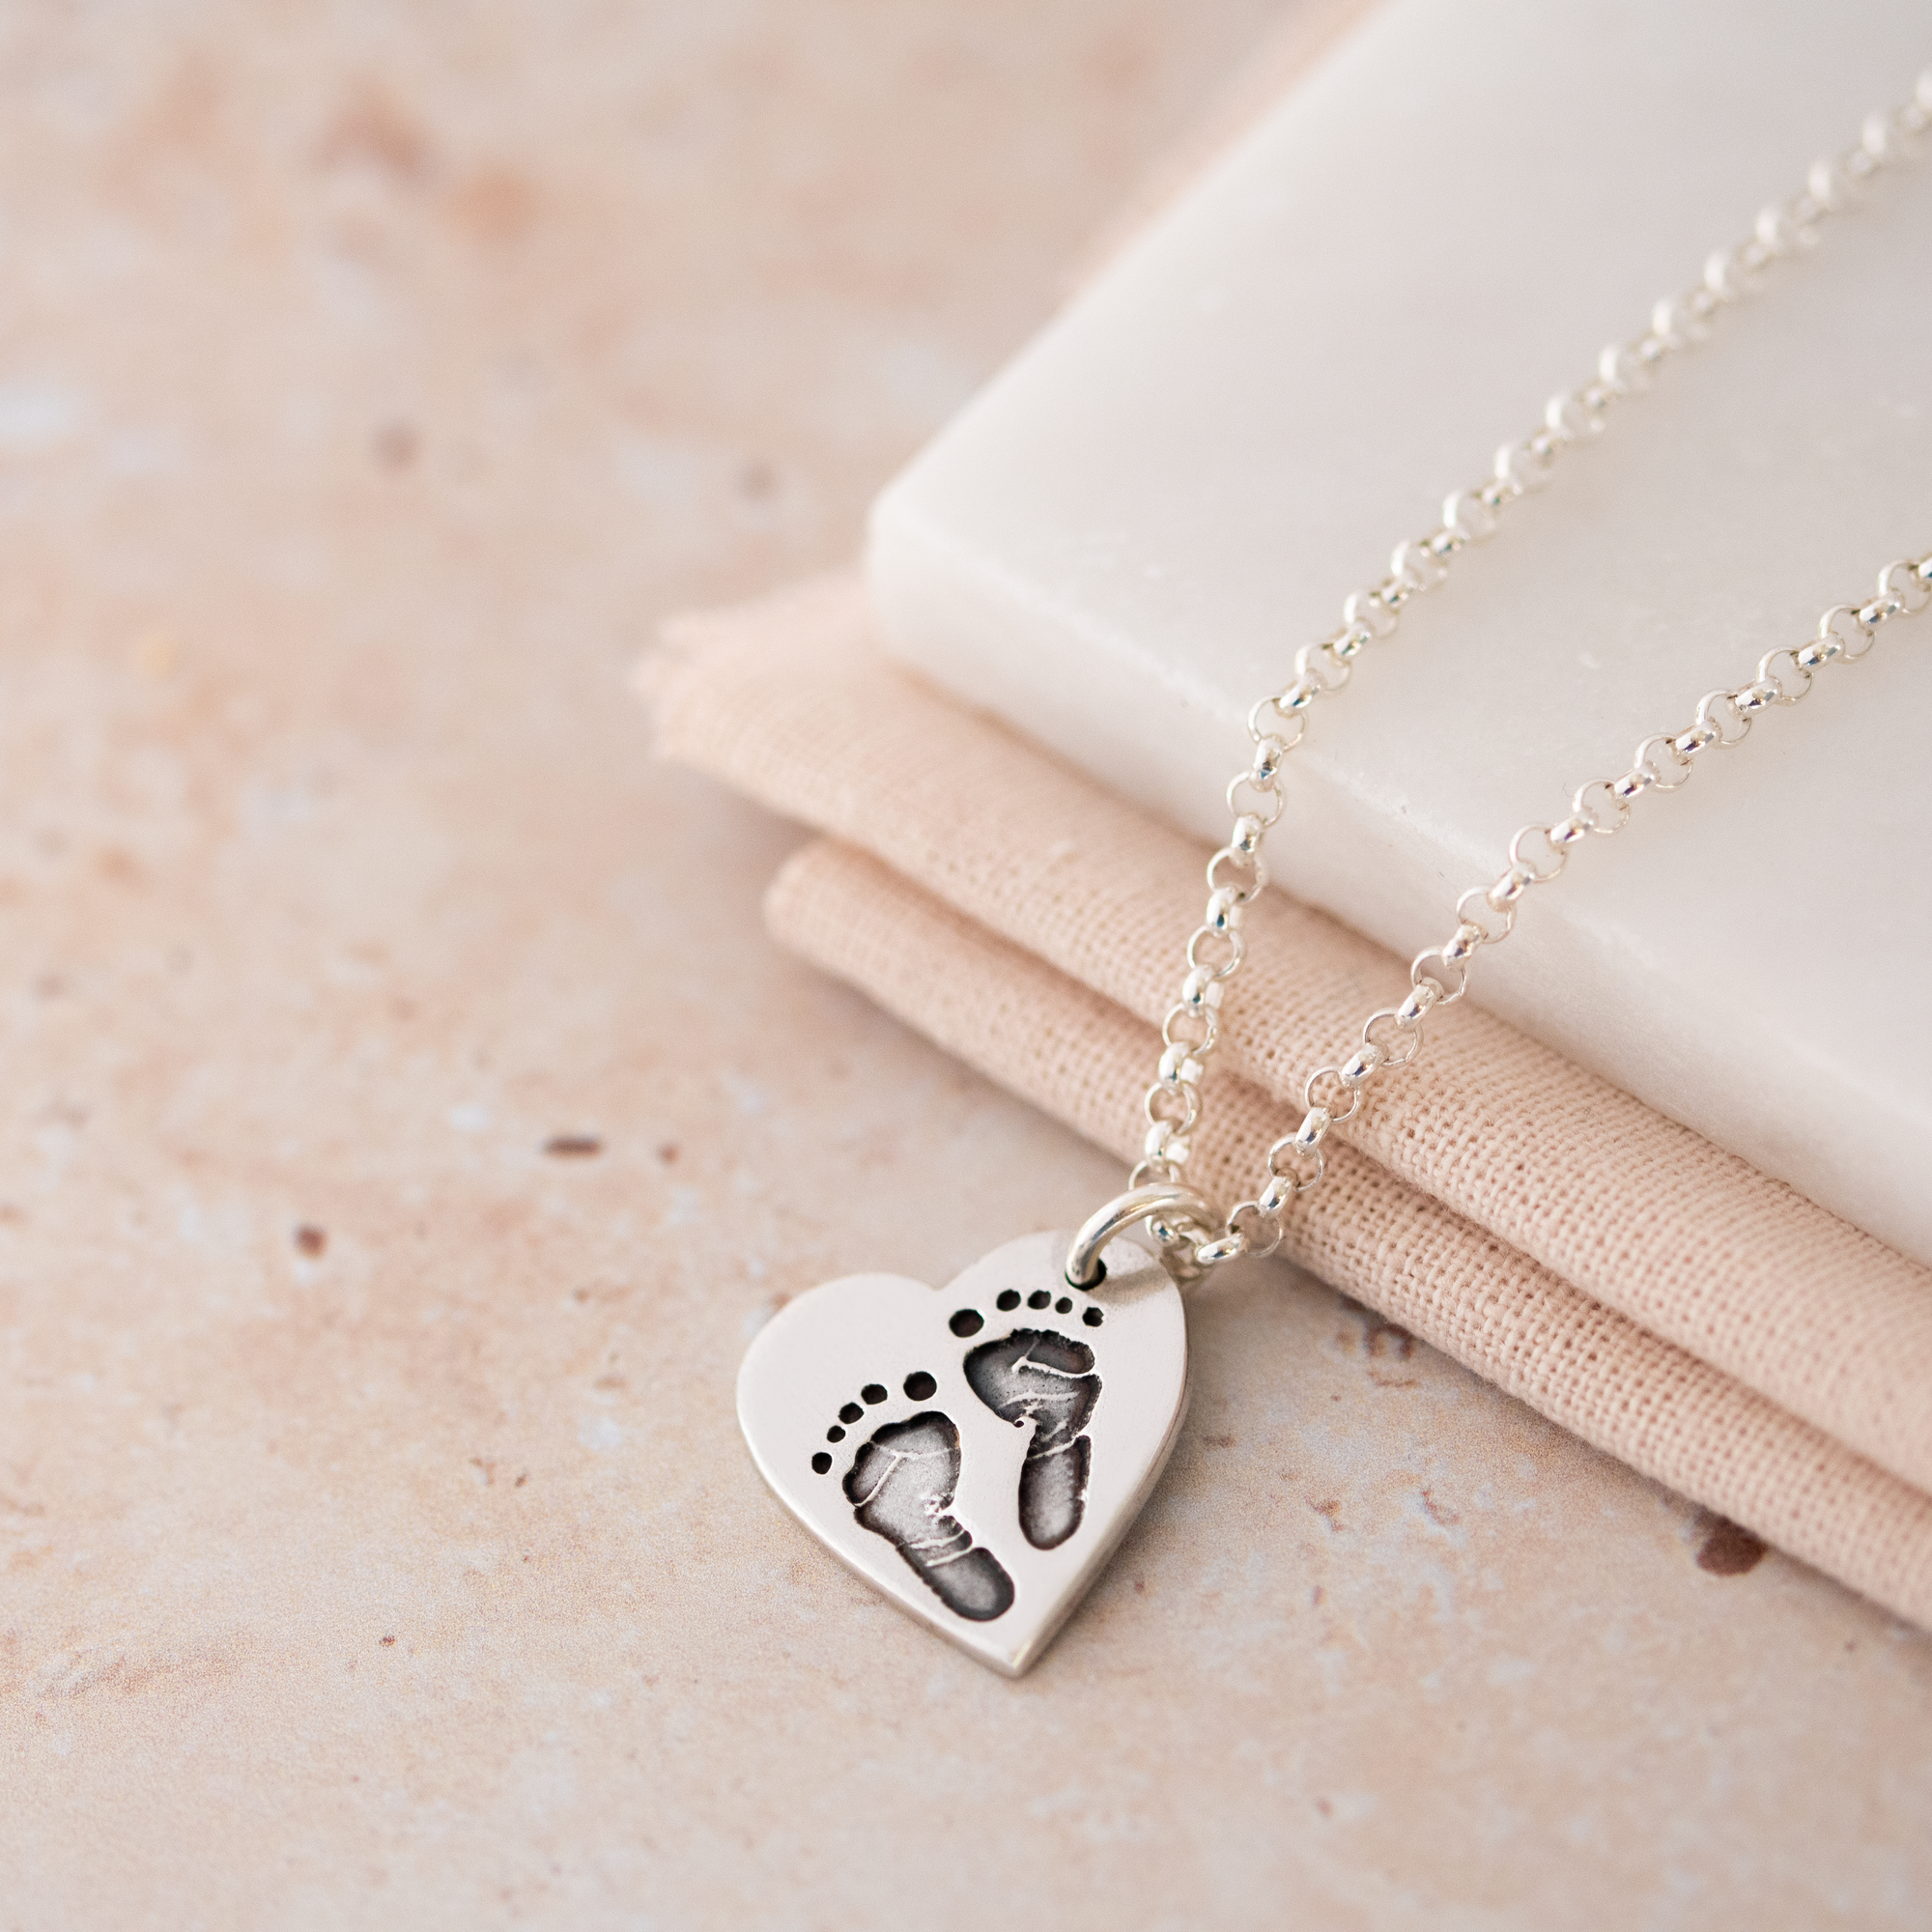 Personalized Loved One's Fingerprint Jewelry Stainless Steel Engravable Pendant  Necklace Actual Thumb Print Keepsake with Gift Box [Silver] - Walmart.com